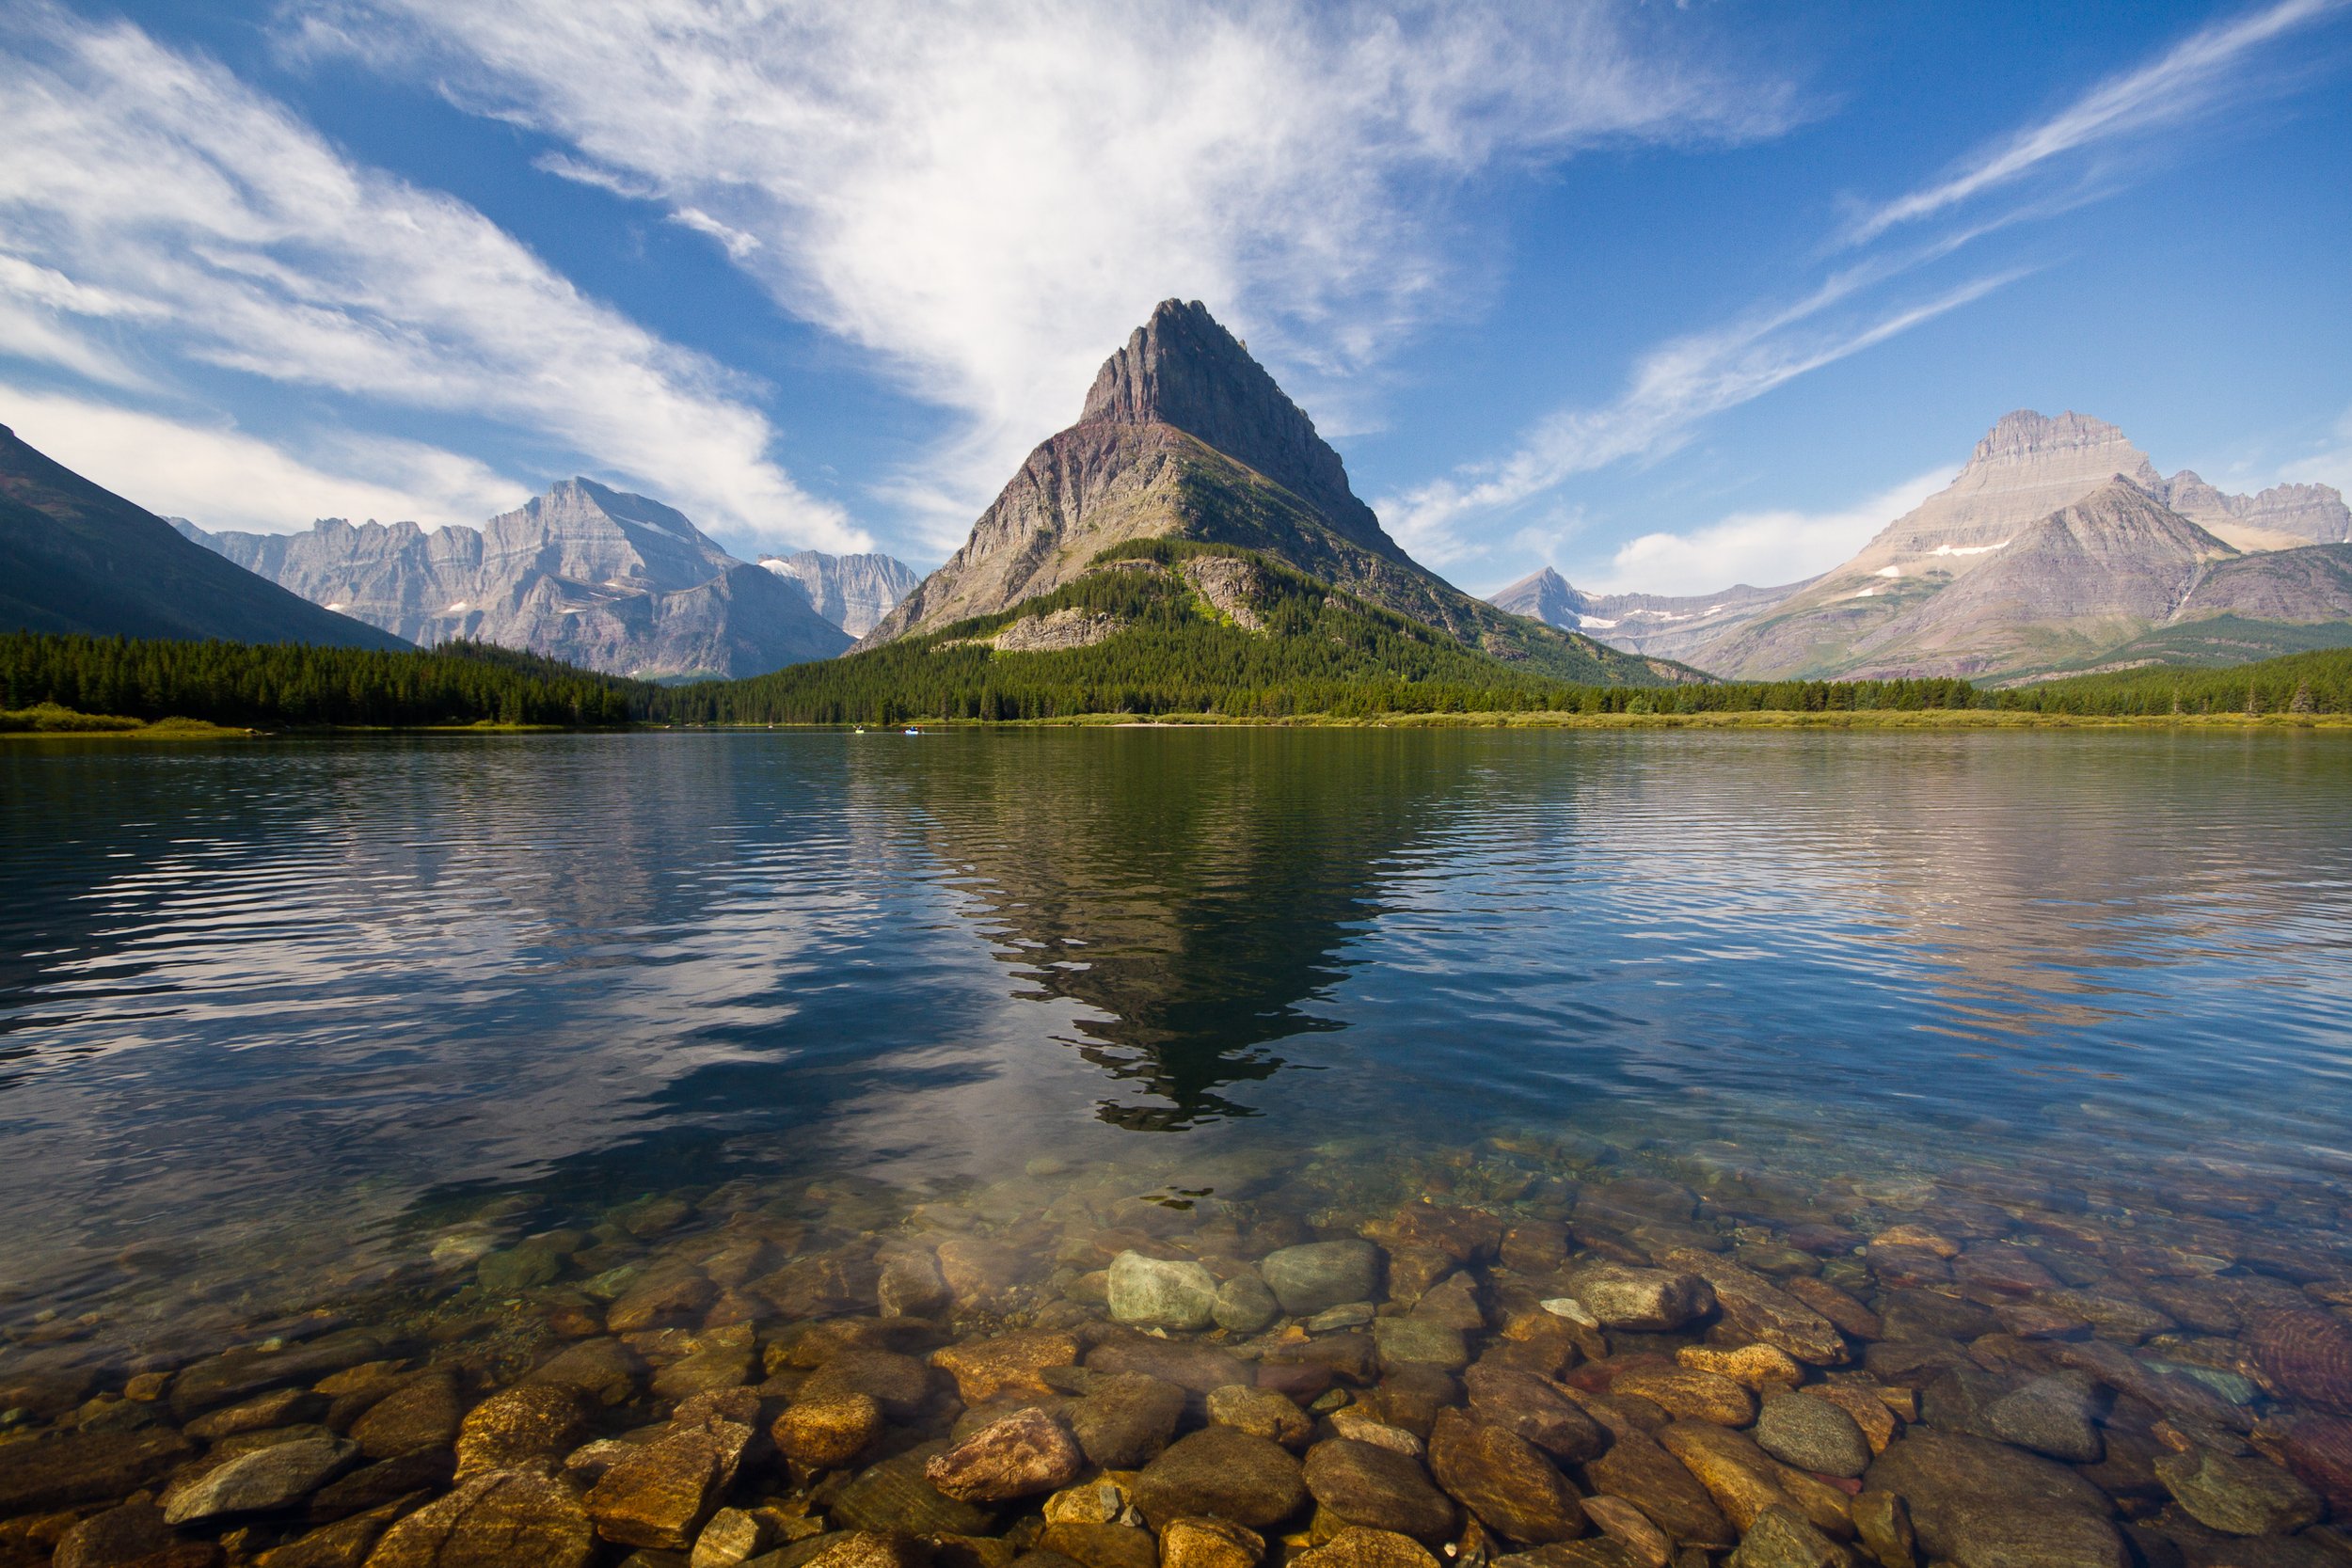 Grinnell_Point_and_Swiftcurrent_Lake_in_Glacier_National_Park,_Montana,_U.S.A.jpg